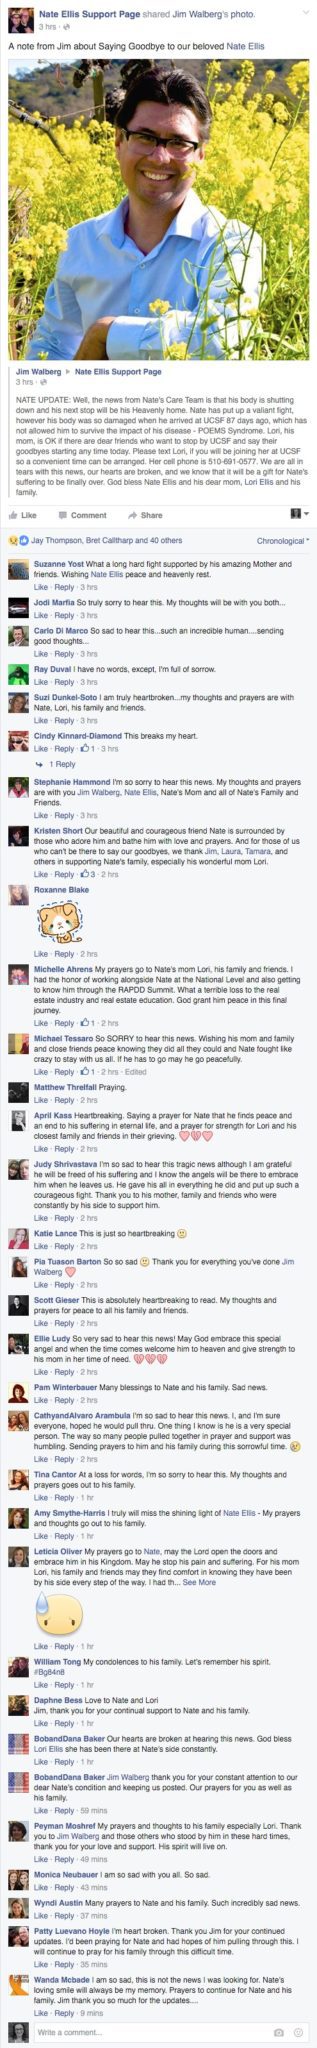 A post from the Nate Ellis Support Page with tributes to Ellis. Screencapture taken at 3:45 PT 4/12/16.